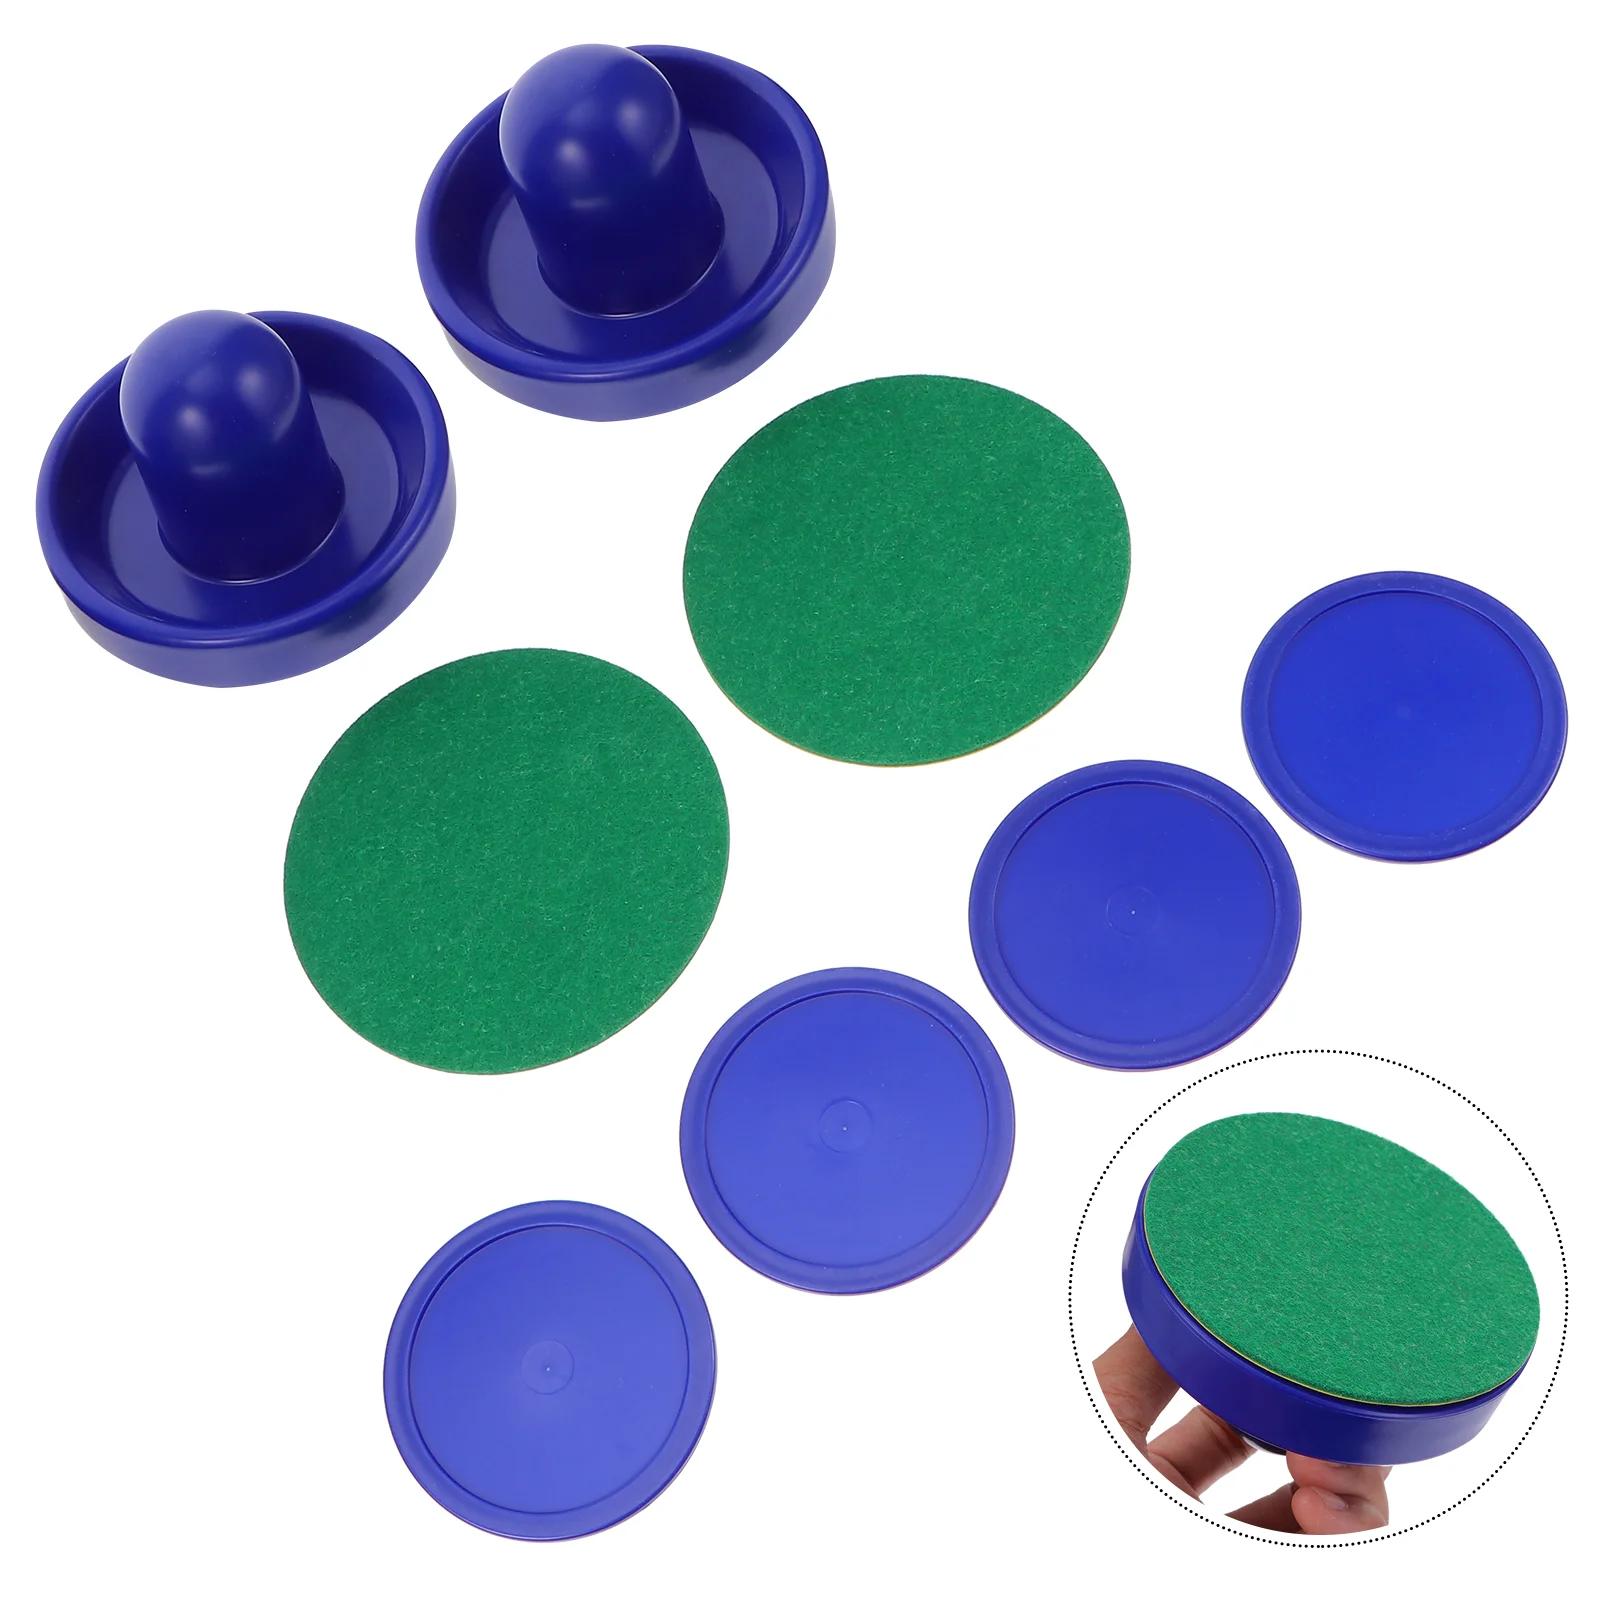 1 Set Air Hockey Pusher ABS Sturdy Prime Durable Puck Paddle for Air Hockey Game Table